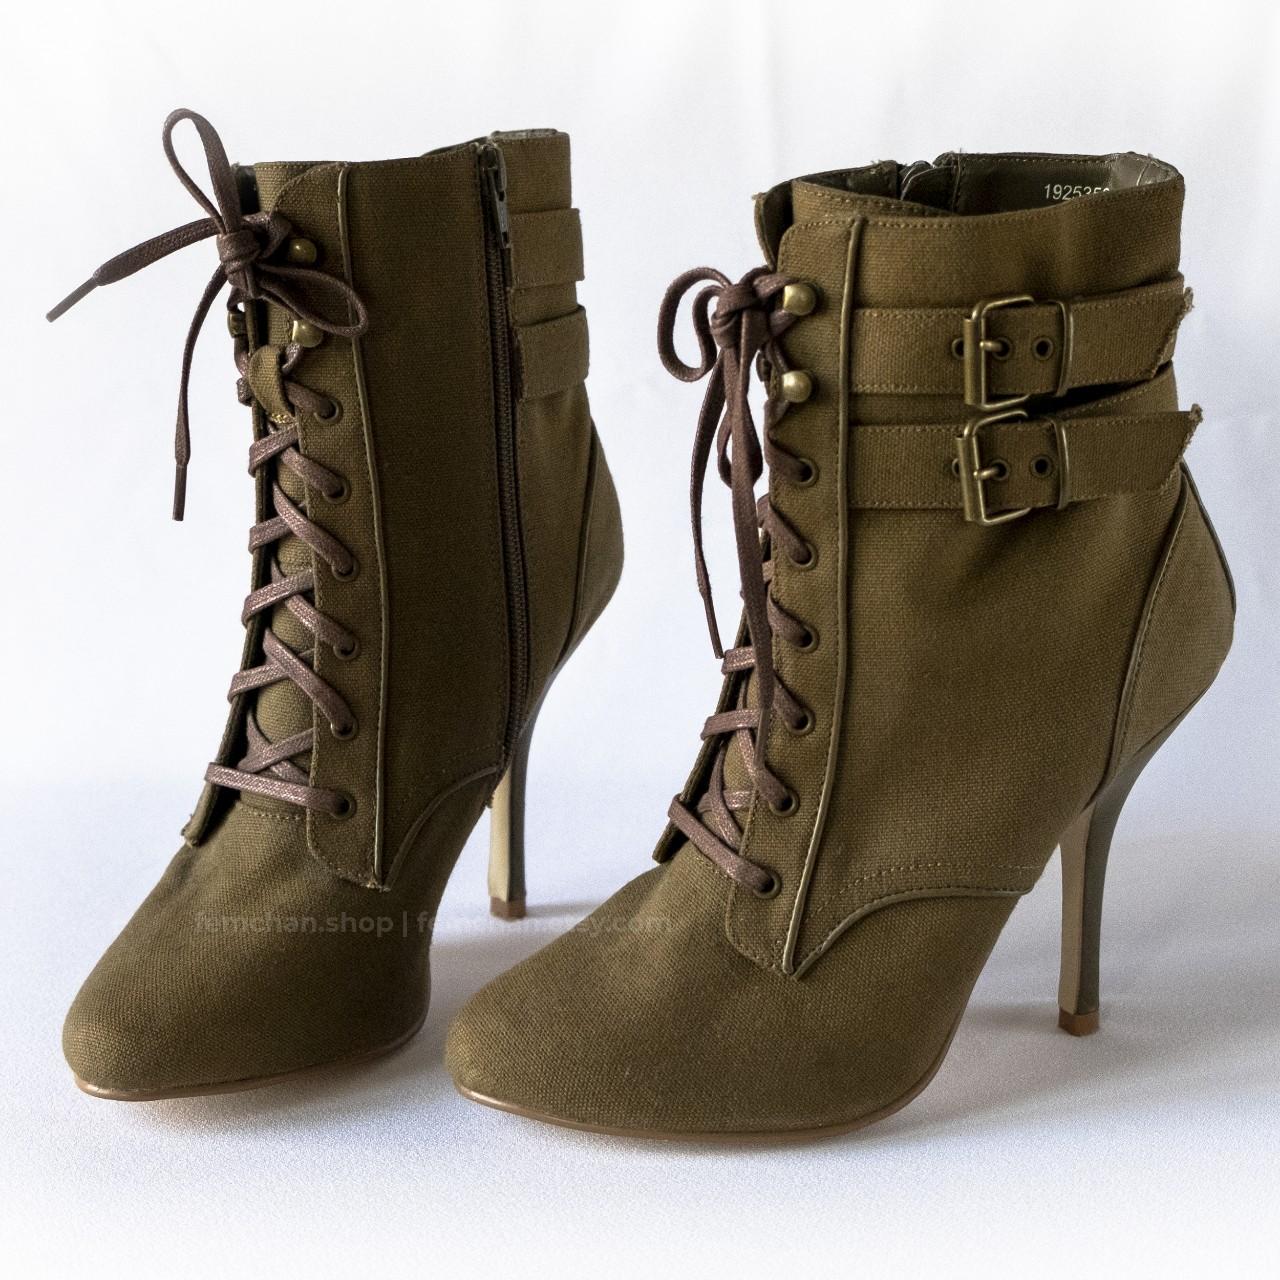 Lace-up ankle boots in military style with hook &... - Depop